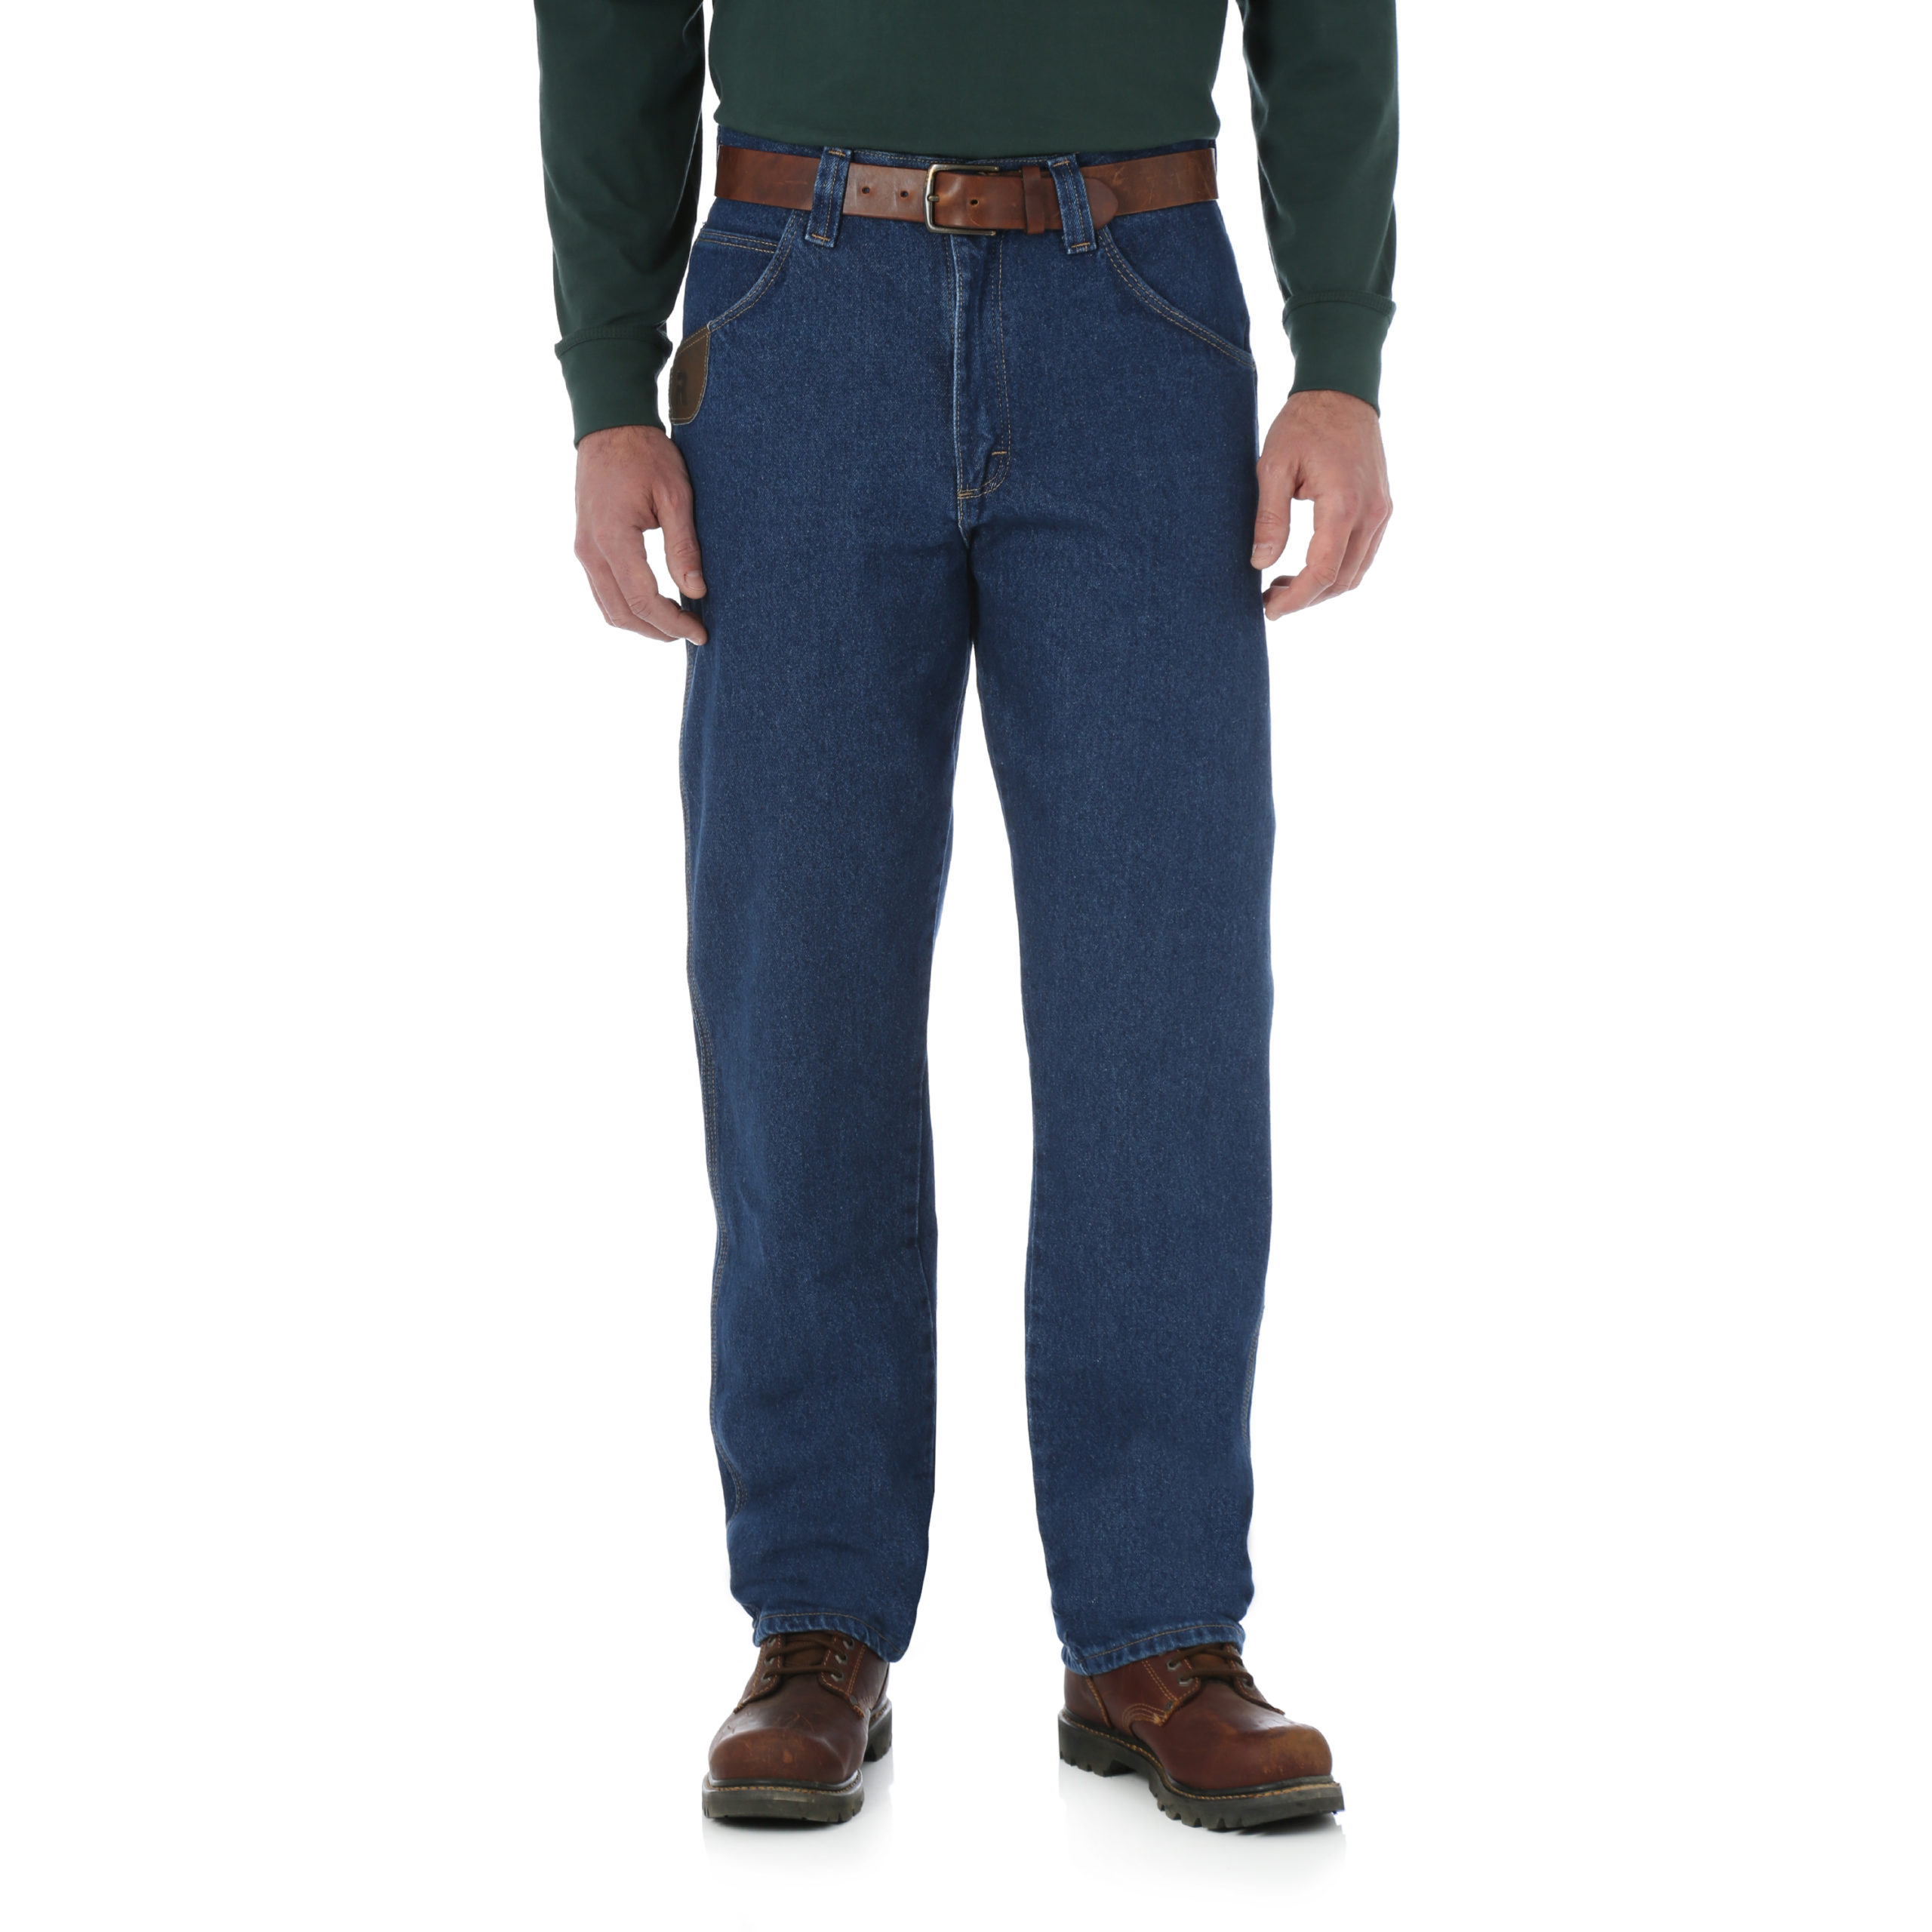 Wrangler - Riggs Workwear Relaxed Fit Jean - Riley & McCormick